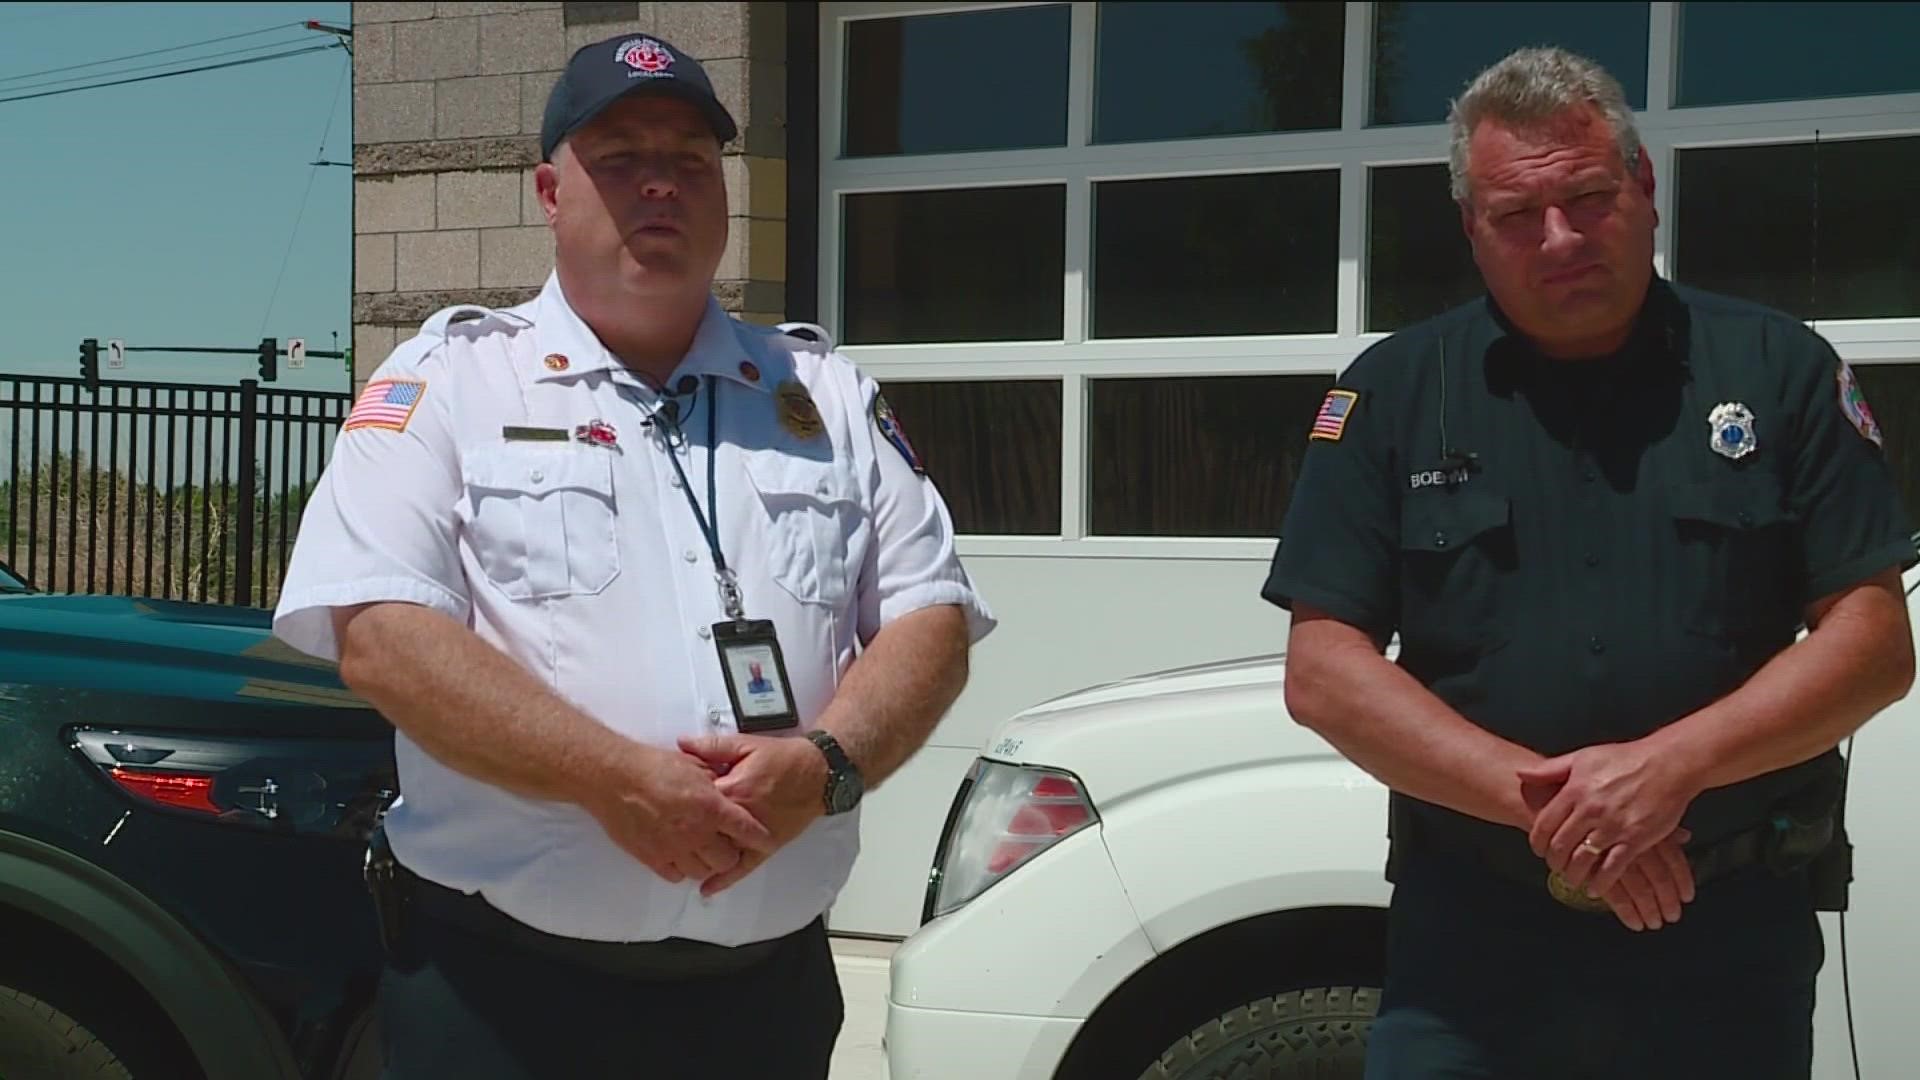 Meridian and Boise Fire held a joint firework safety demonstration to remind residents of the importance of celebrating safely during Fourth of July.